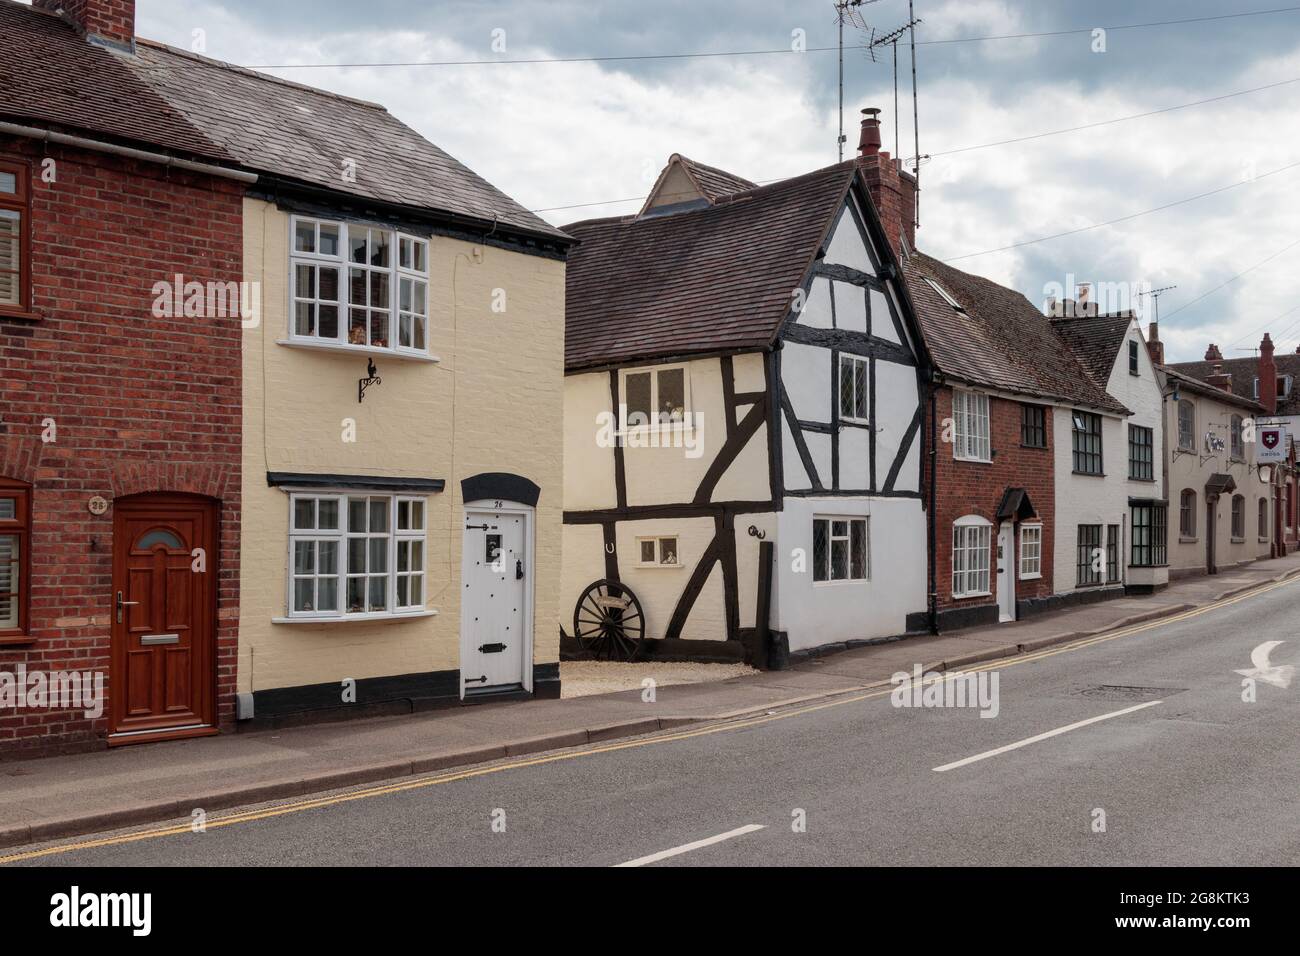 KENILWORTH, WARWICKSHIRE, UNITED KINGDOM - MAY 29, 2021: View of antiquated buildings Stock Photo